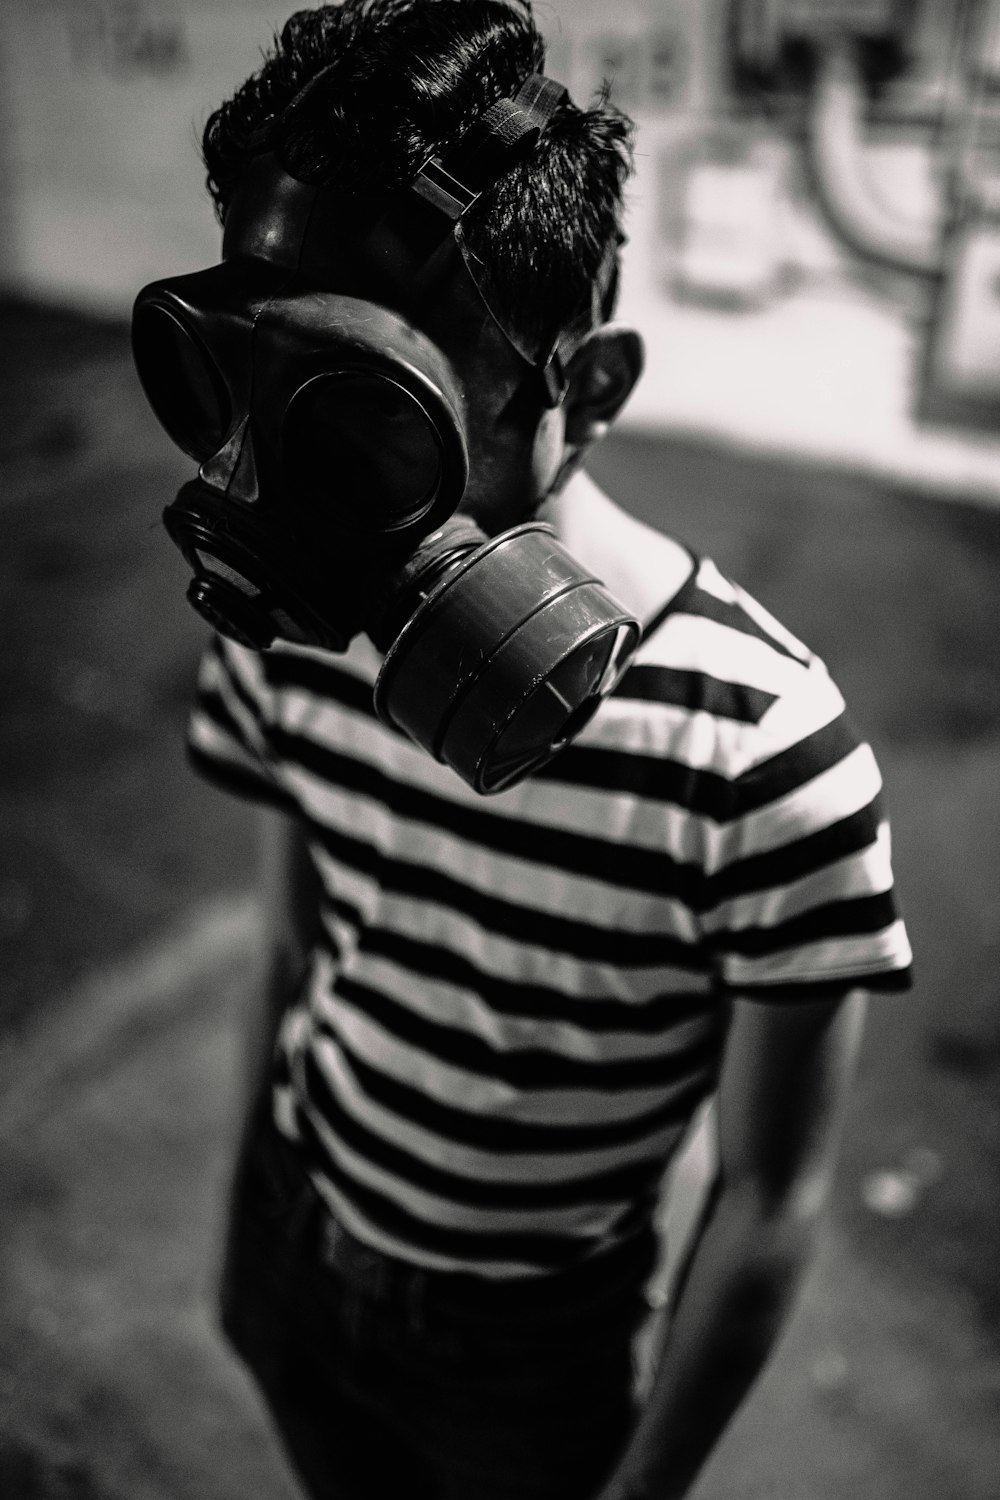 person in black and white stripe shirt wearing black gas mask